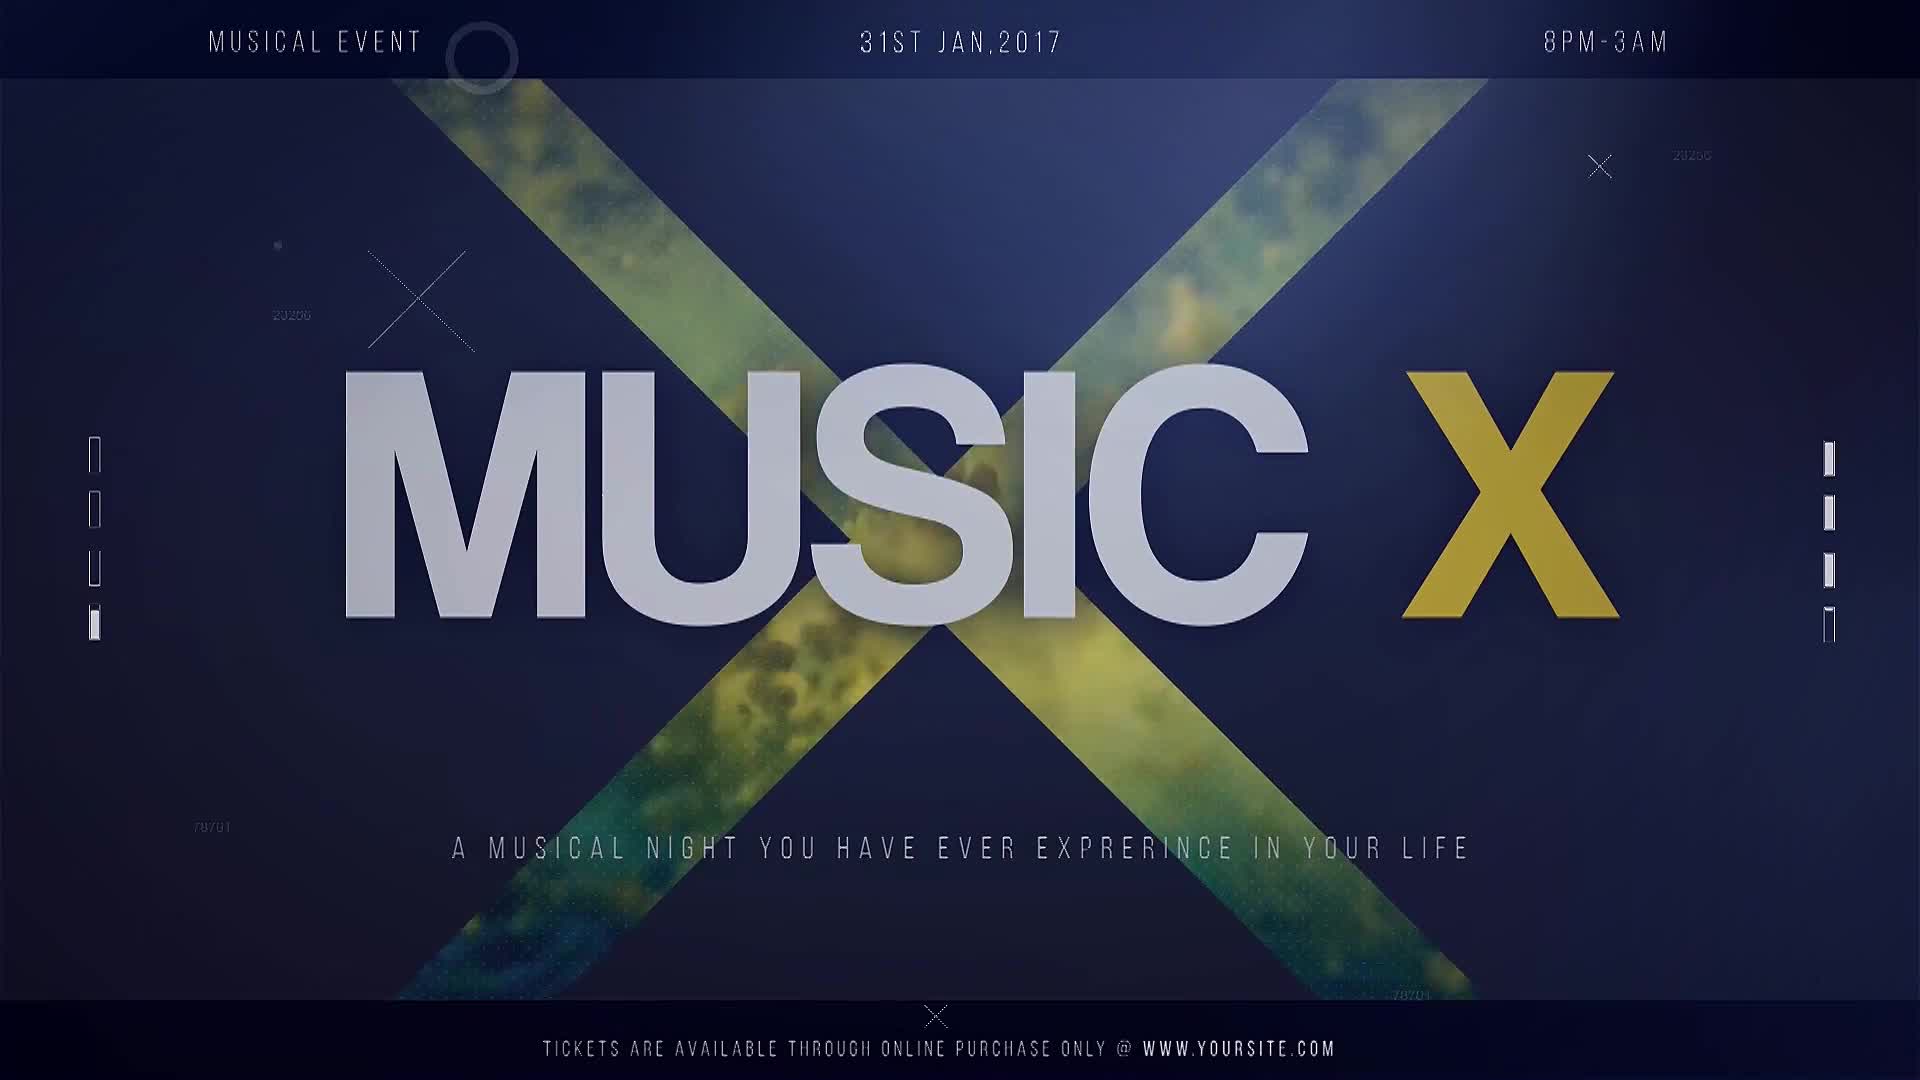 Music X - Download Videohive 22311573